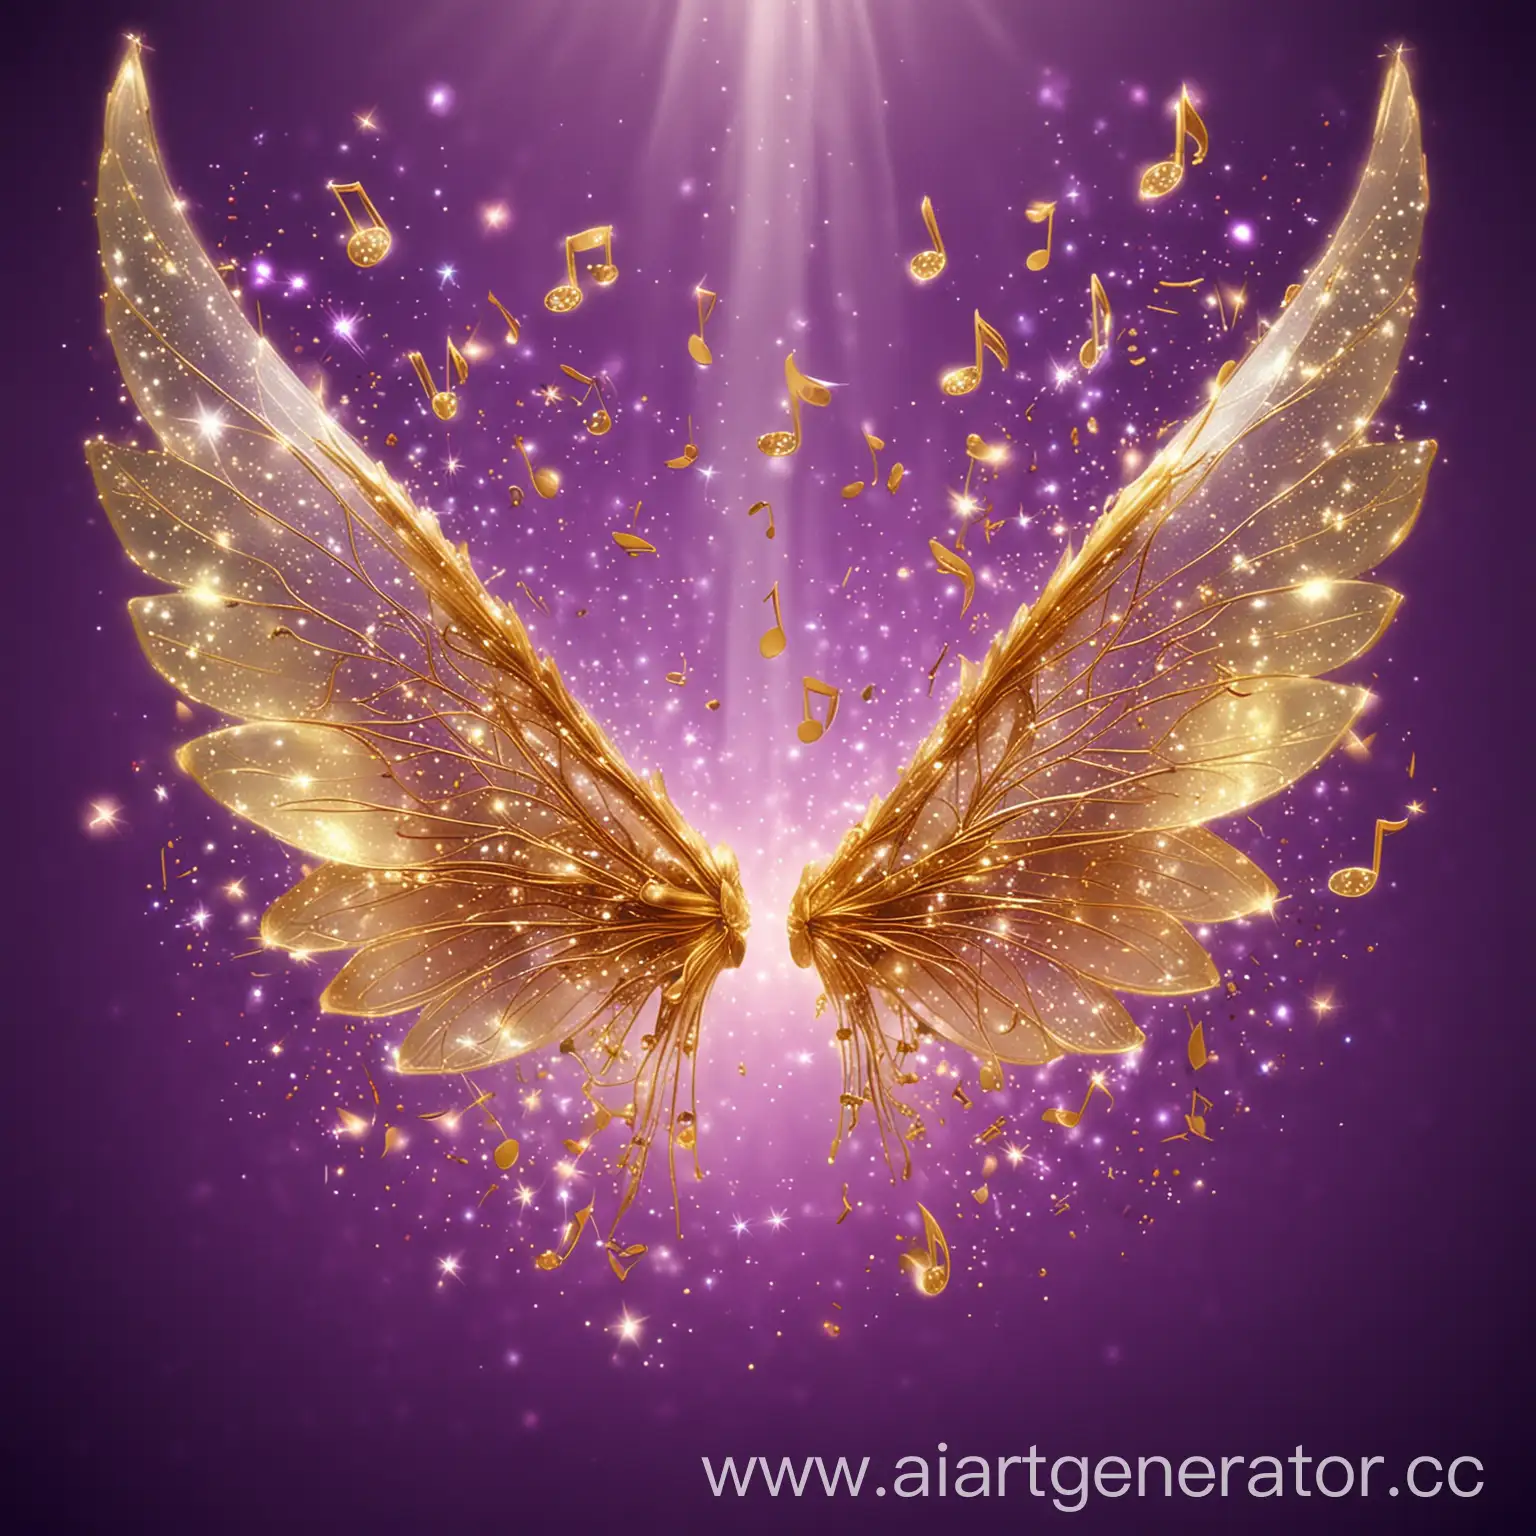 Golden-Fairy-Wings-Centerpiece-on-PurpleGreen-Party-Background-with-Sparkles-and-Musical-Notes